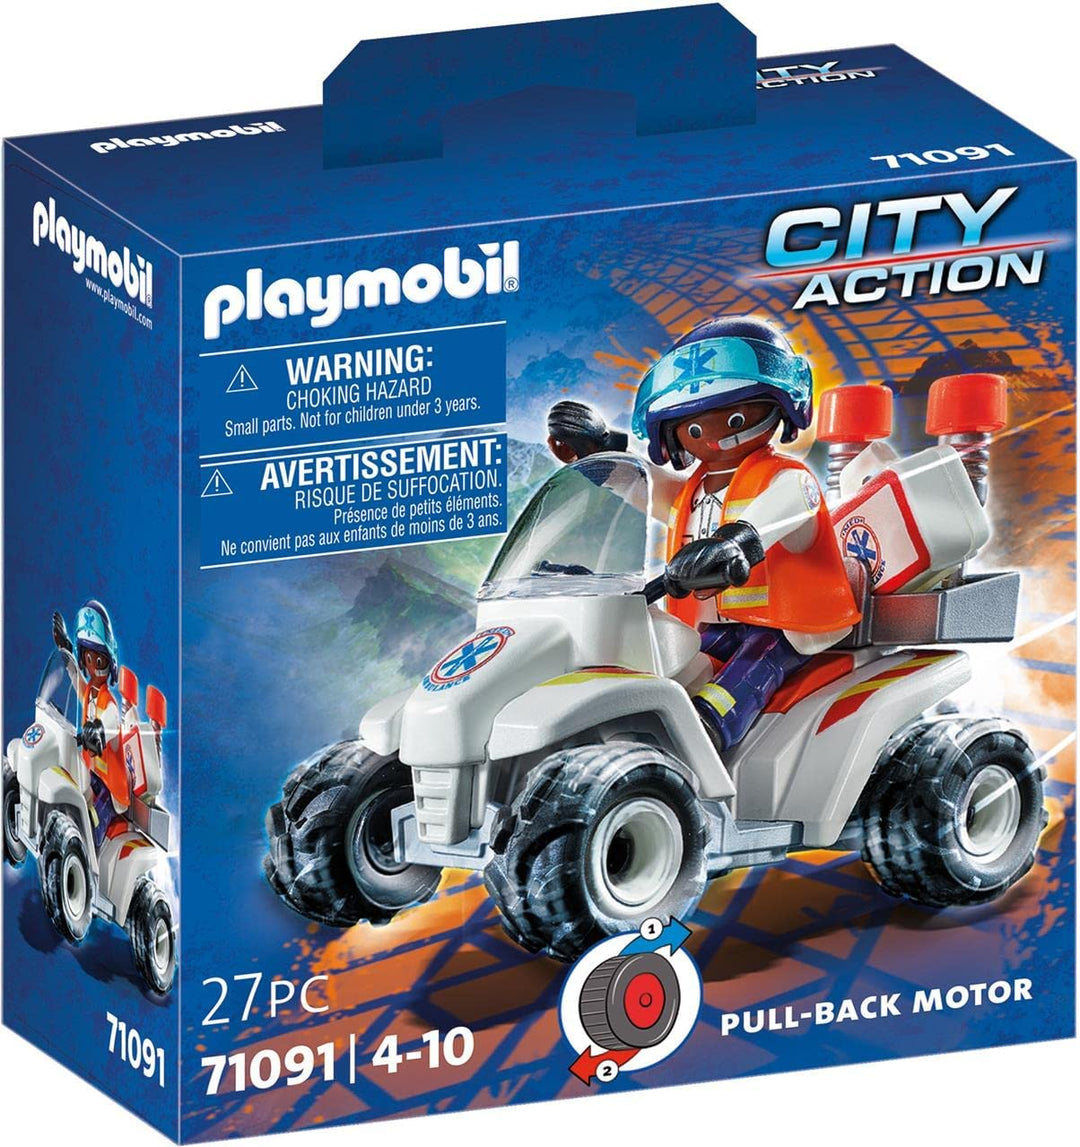 PLAYMOBIL City Action 71091 Medical Quad with Pullback Motor, Toy for Children